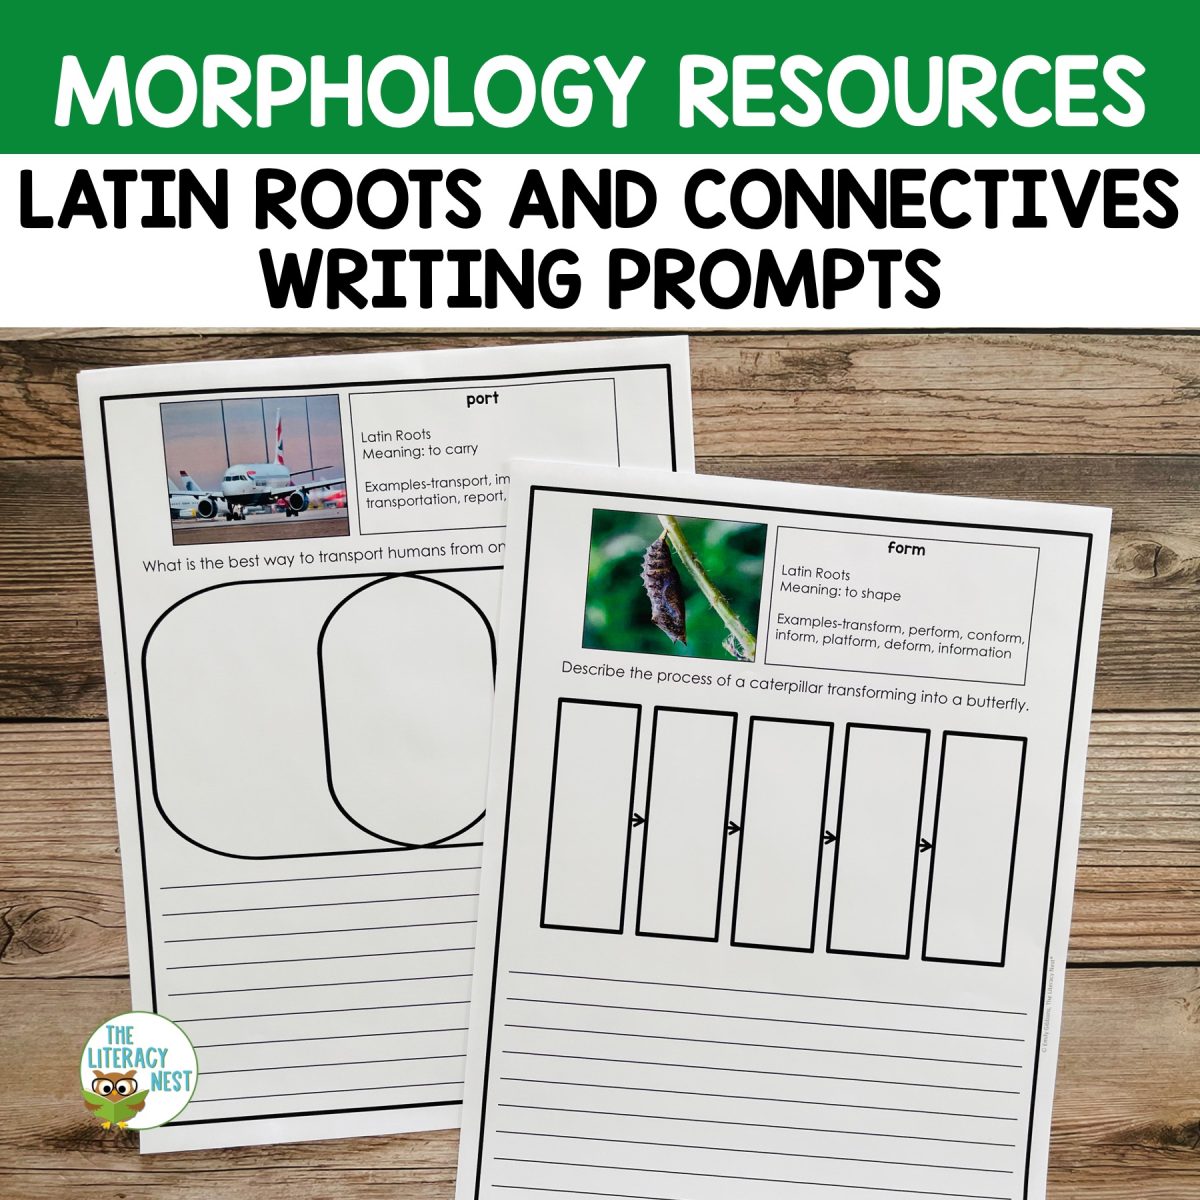 Latin Roots and Connectives Morphology Writing Prompts - The Literacy Nest